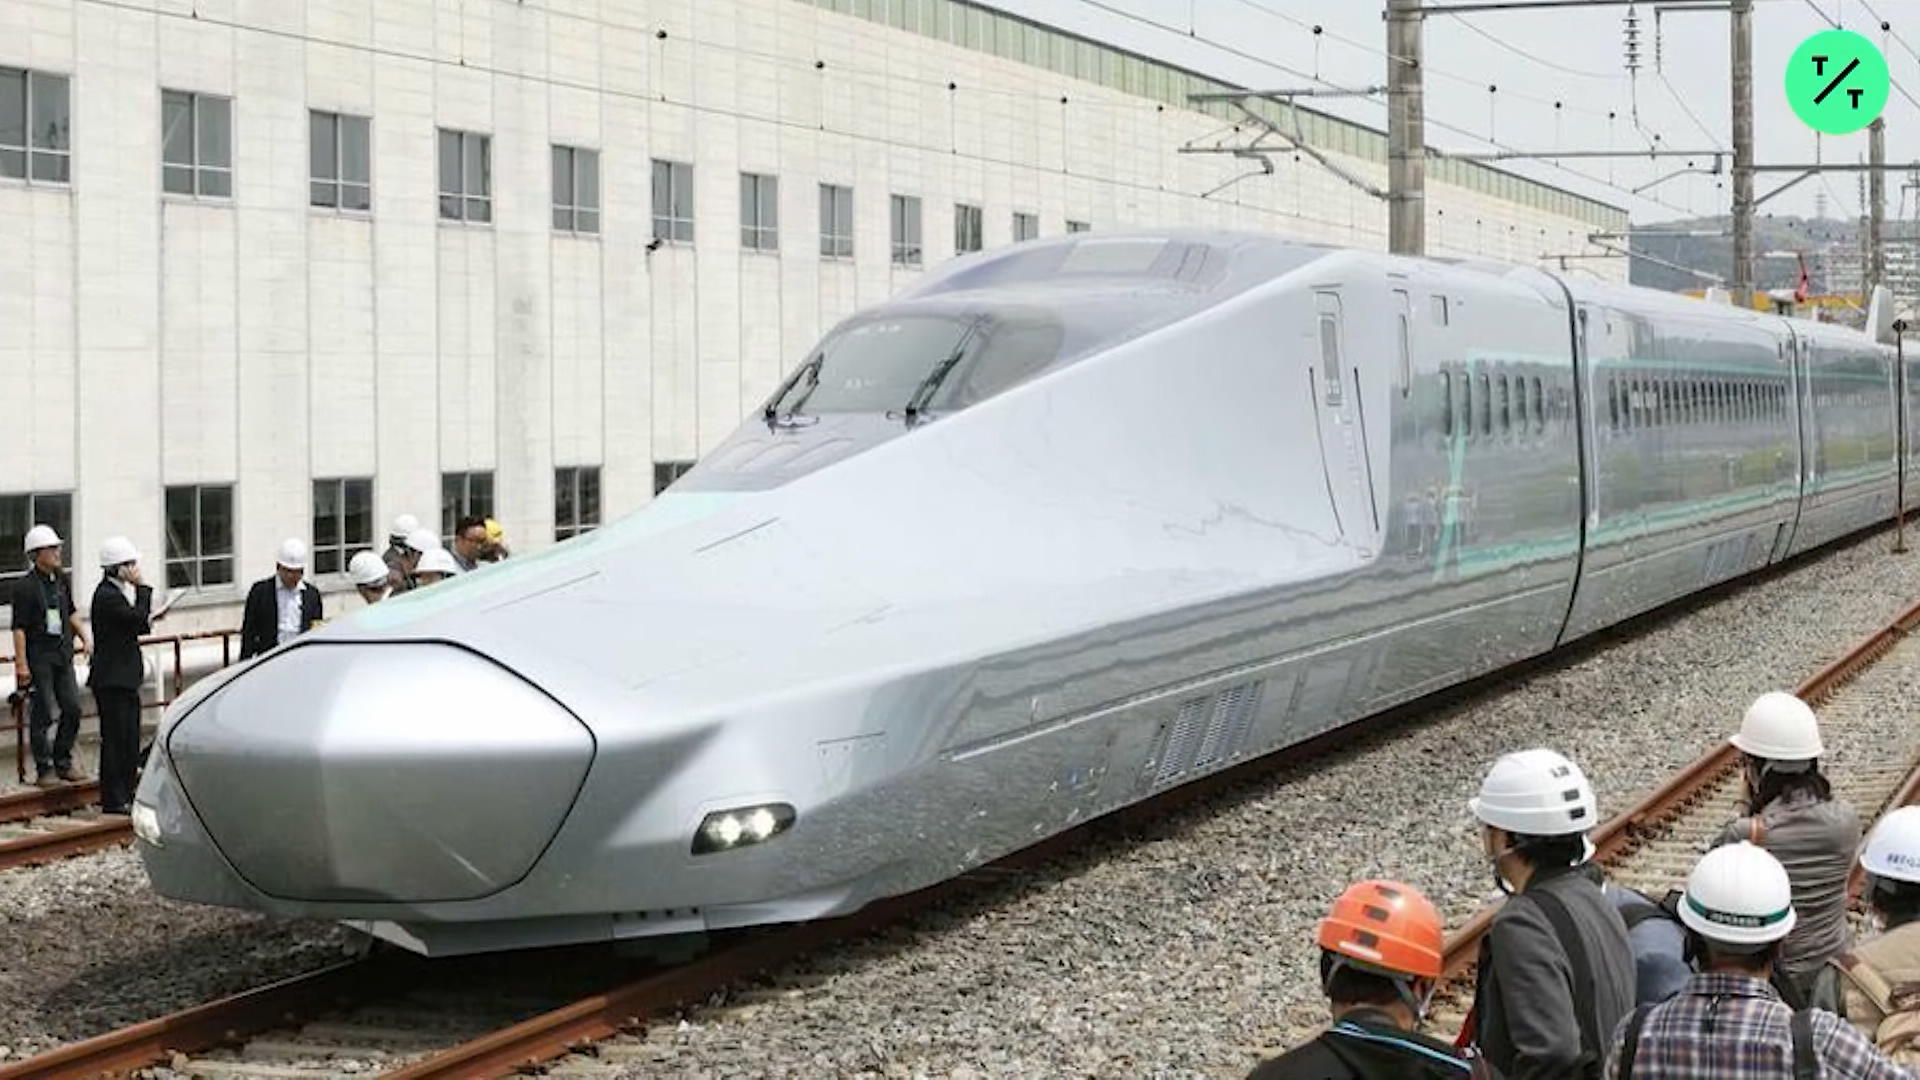 World's Fastest Bullet Train Starts High-Speed Tests in Japan - Bloomberg